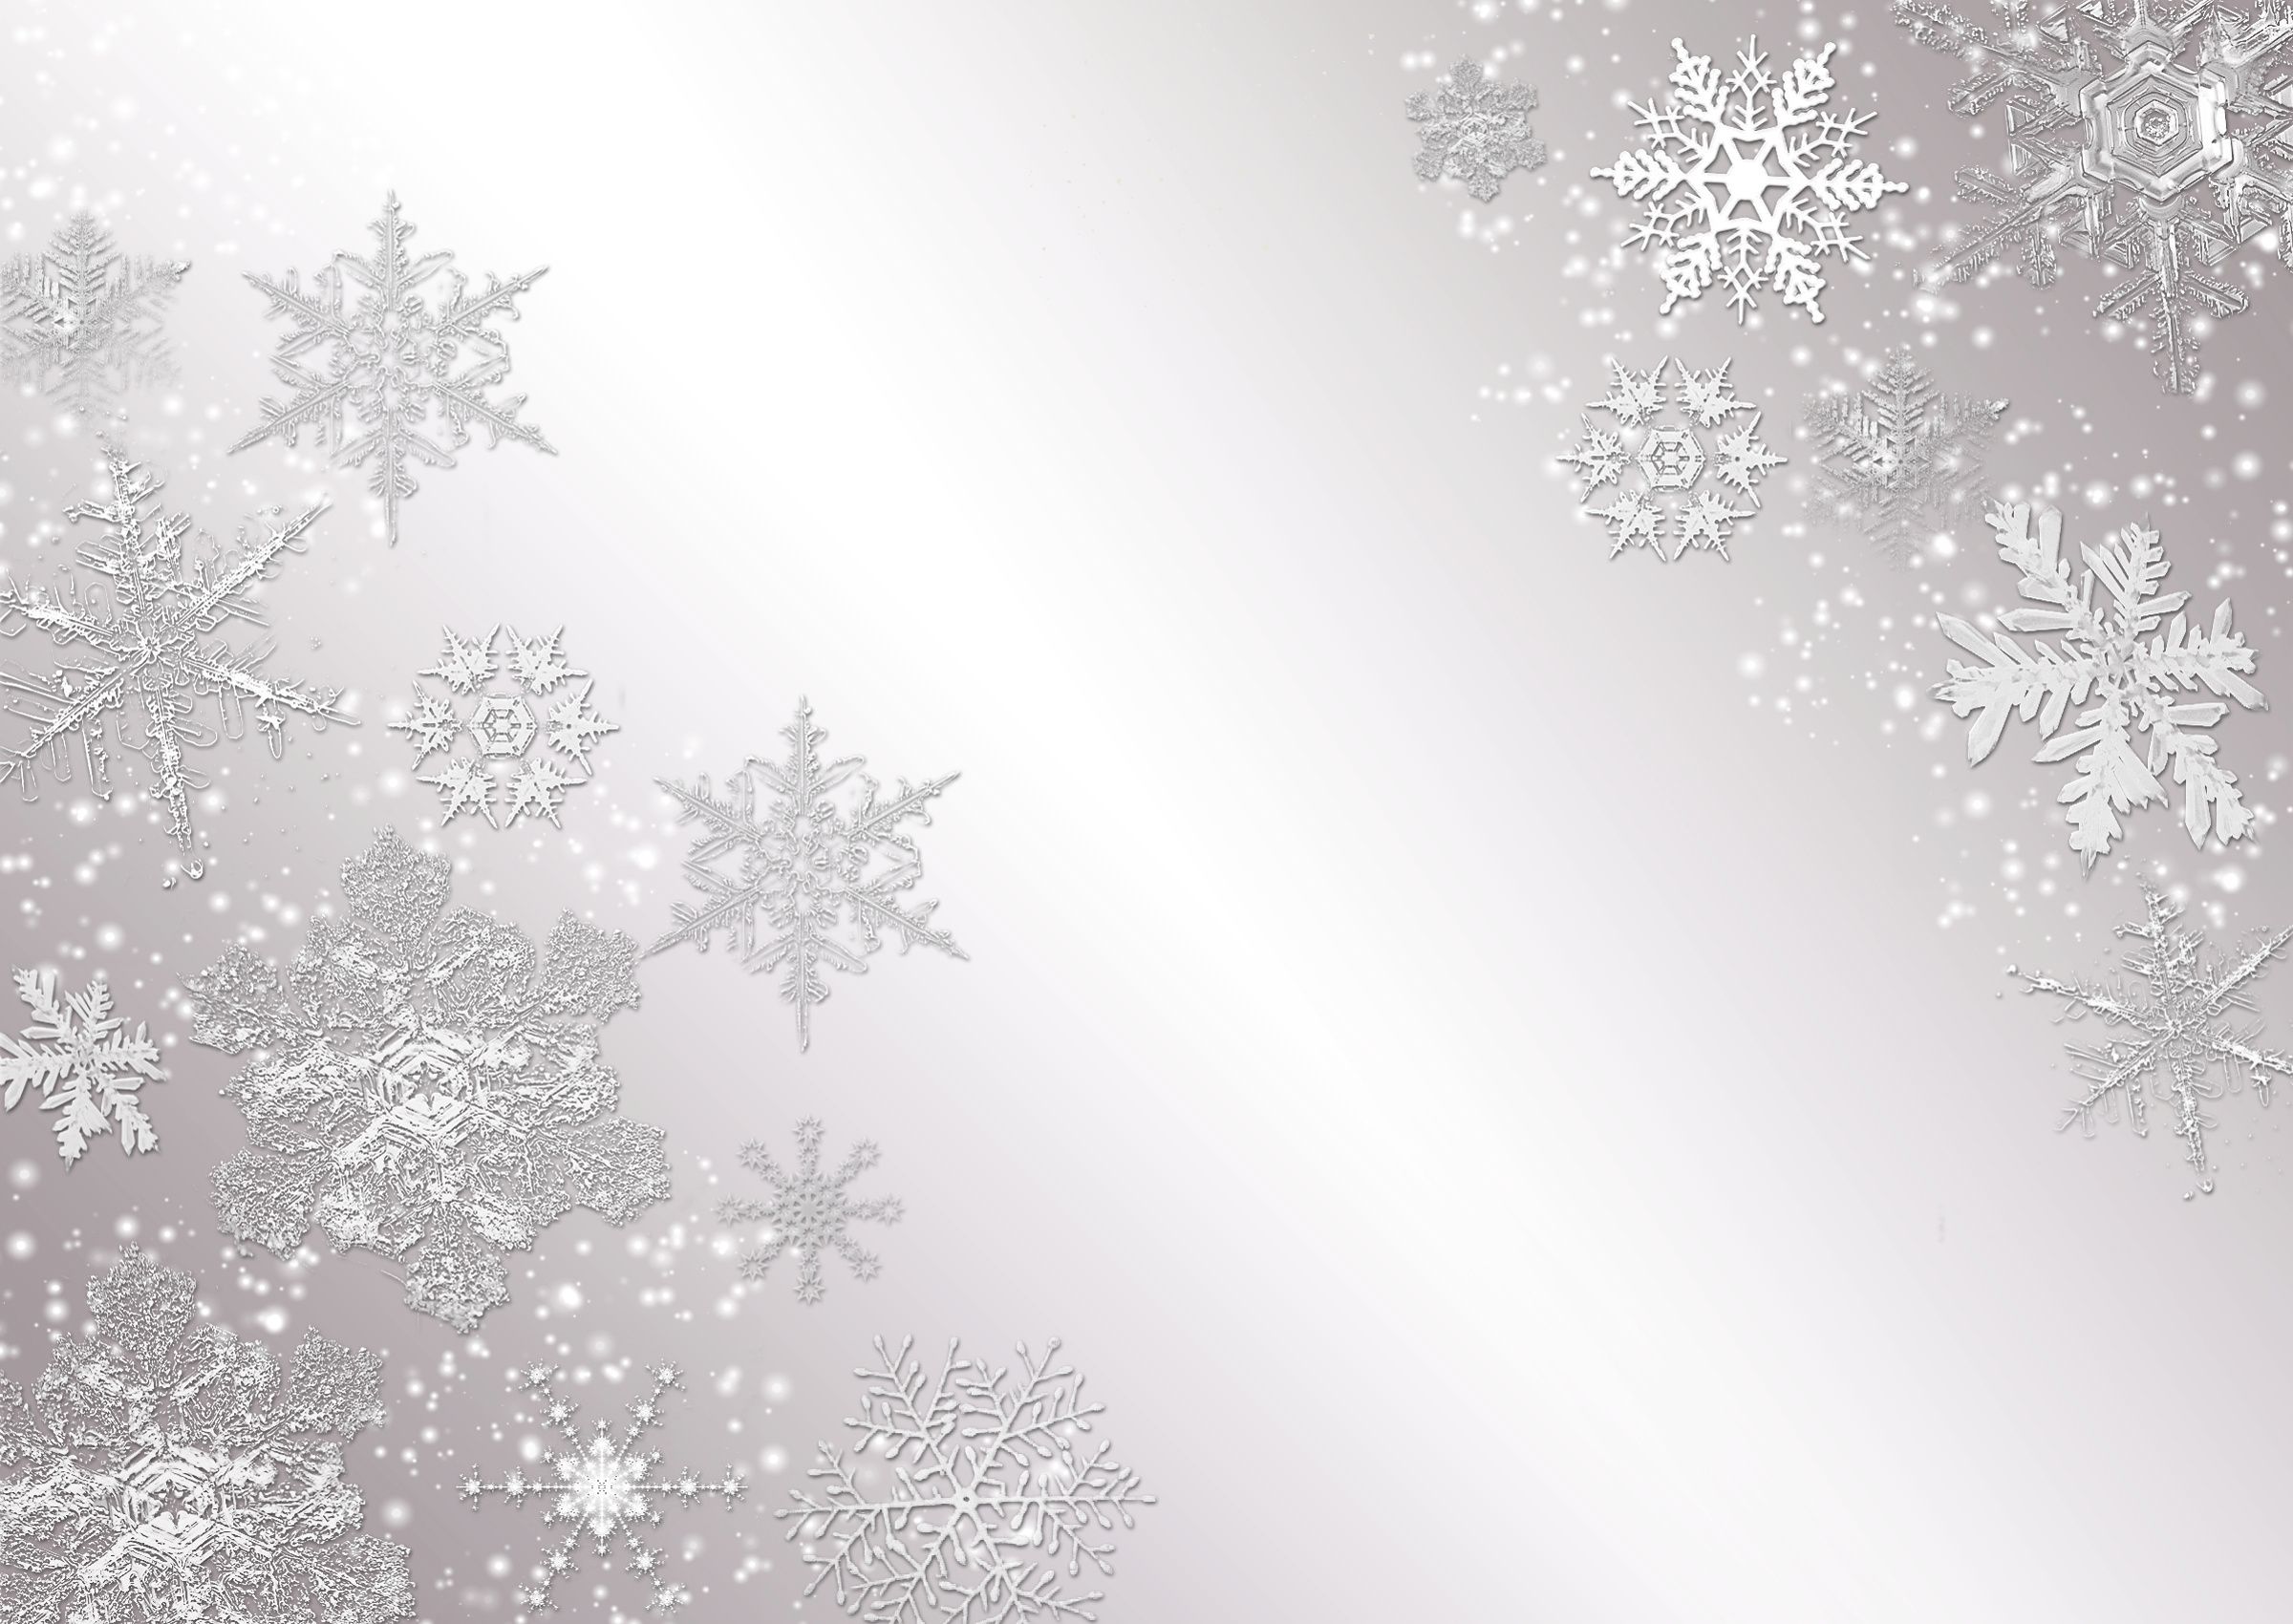 White Snowflakes Wallpaper Background #40j • Other at ngepLuk.com